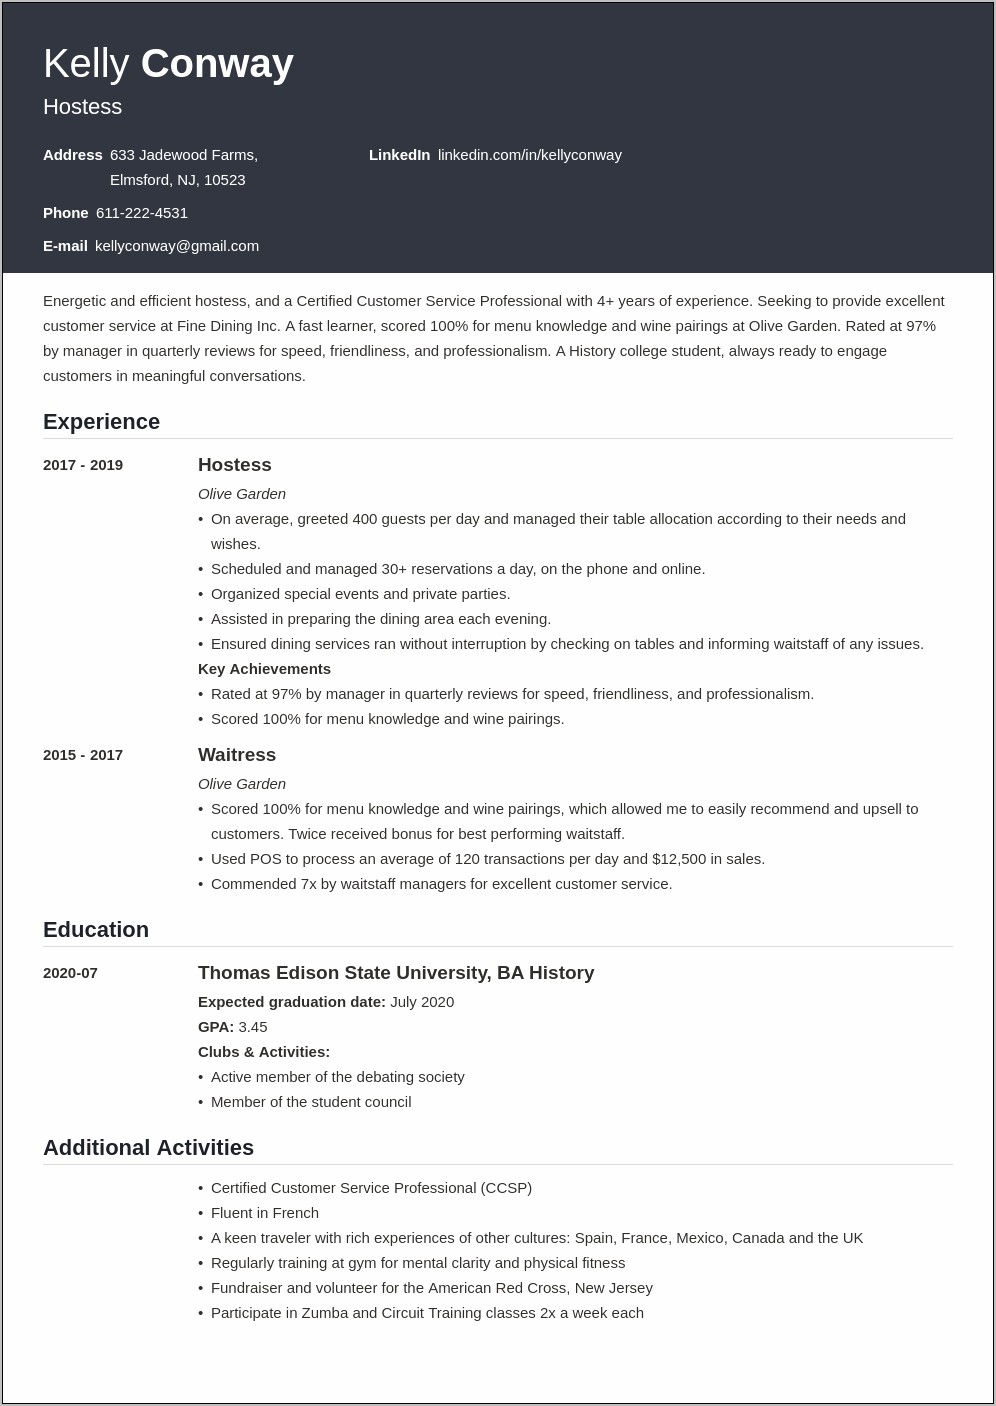 Resume For A Hostess Position With No Experience